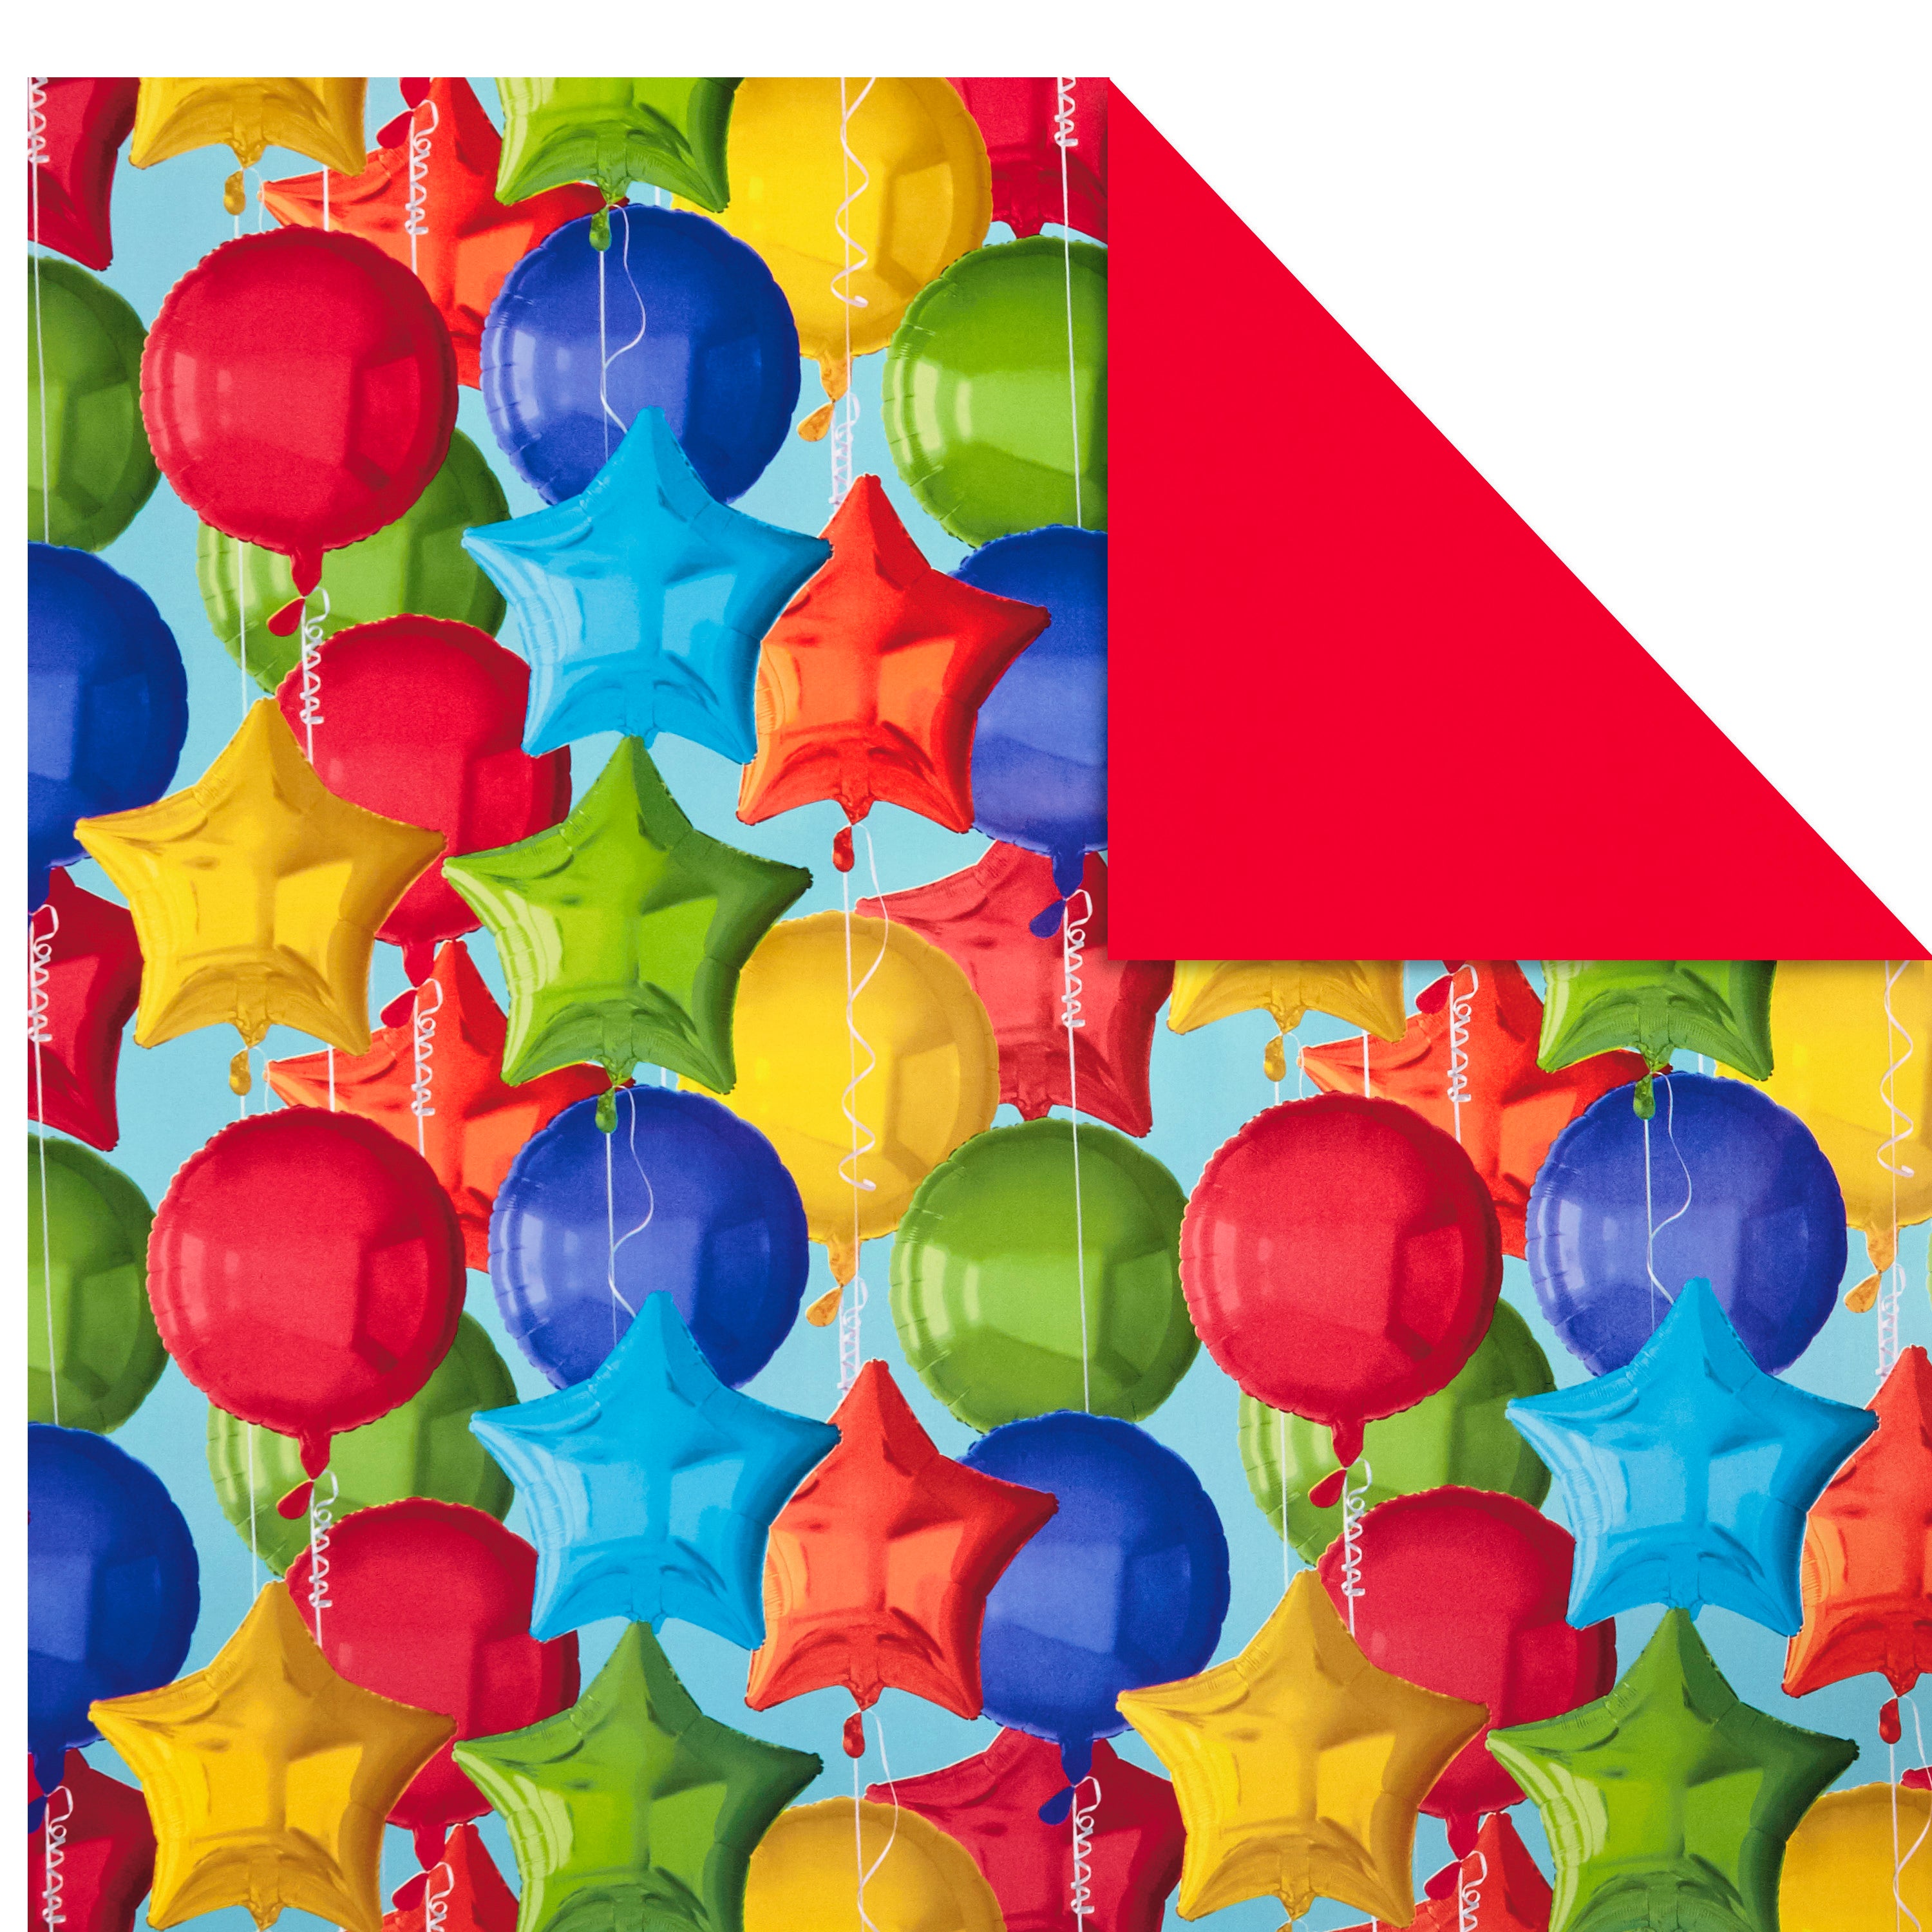 All Occasion Reversible Wrapping Paper Bundle - Kids Birthday (3 Rolls - 75 sq. ft. total) Balloons, Stars, Cupcakes, Blue Stripes, Solid Red